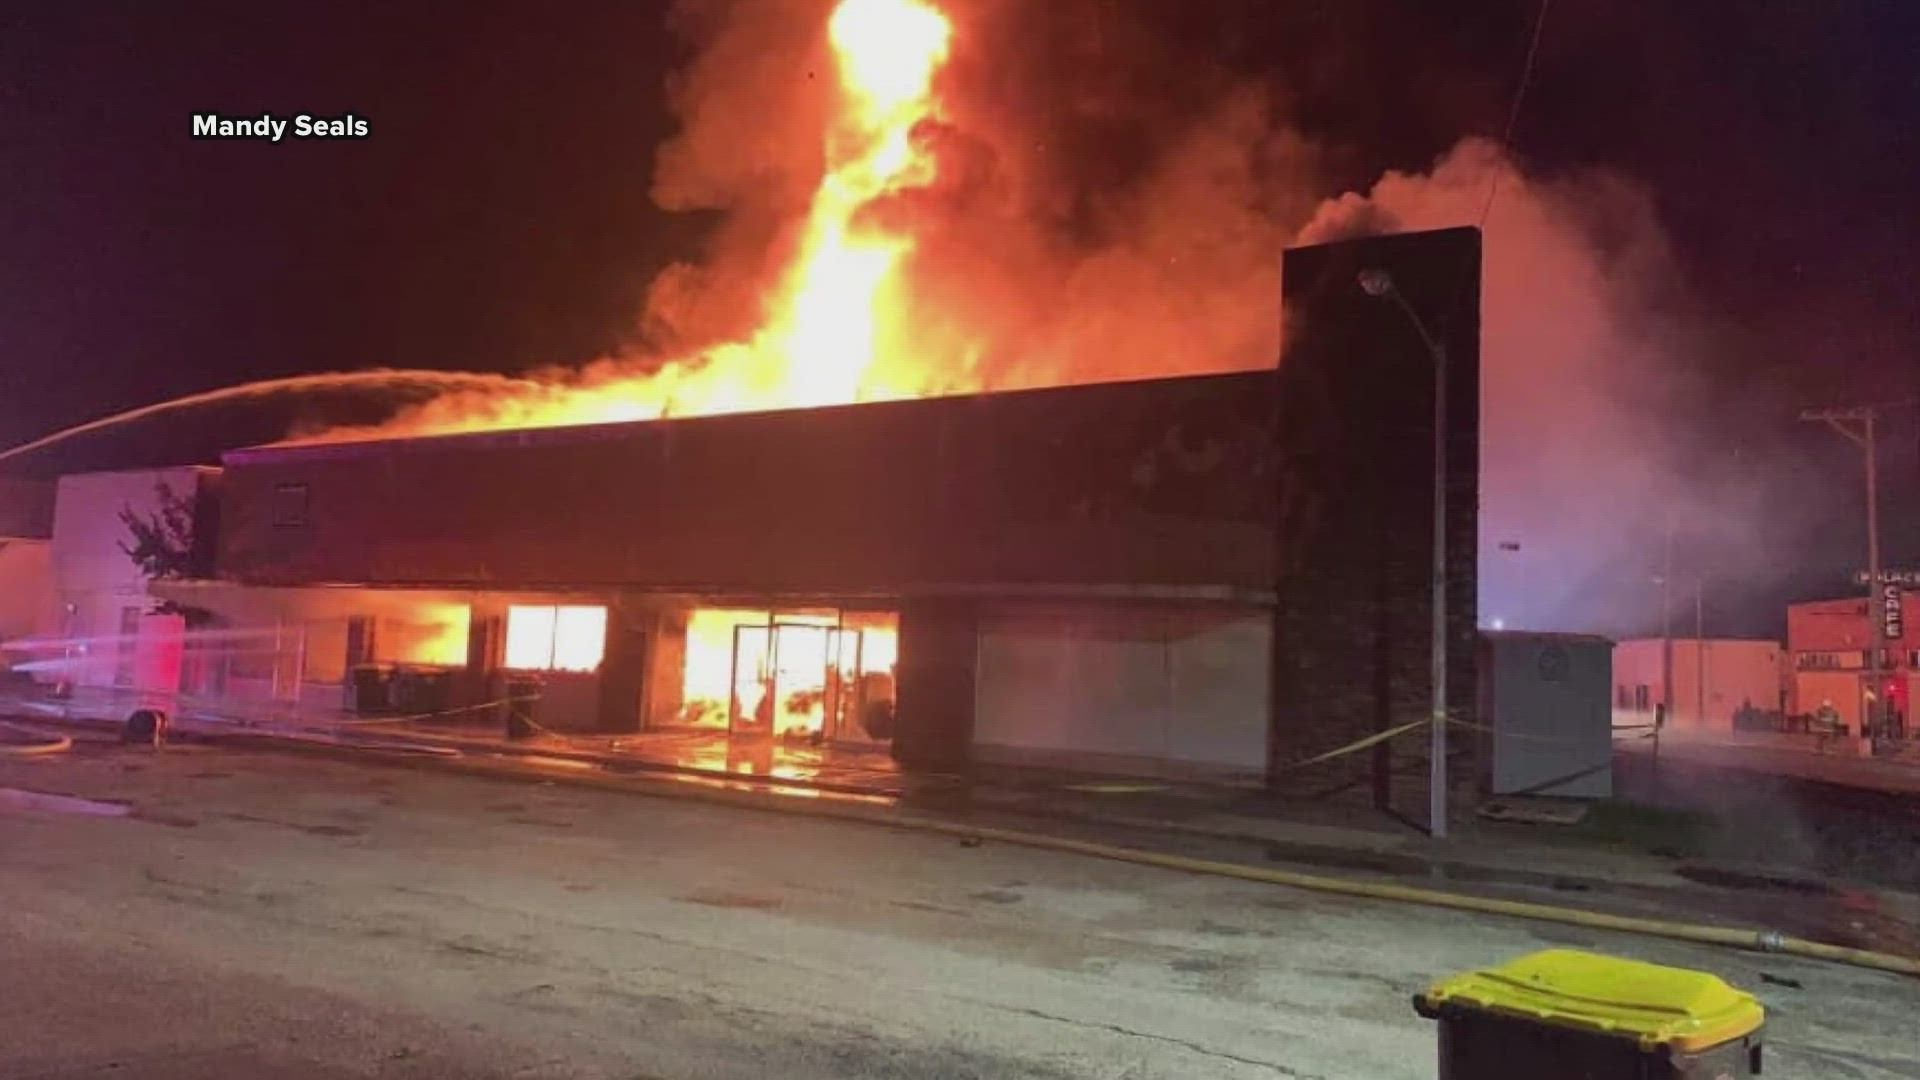 According to Marlin officials, there were no reported injuries in connection with the fire.